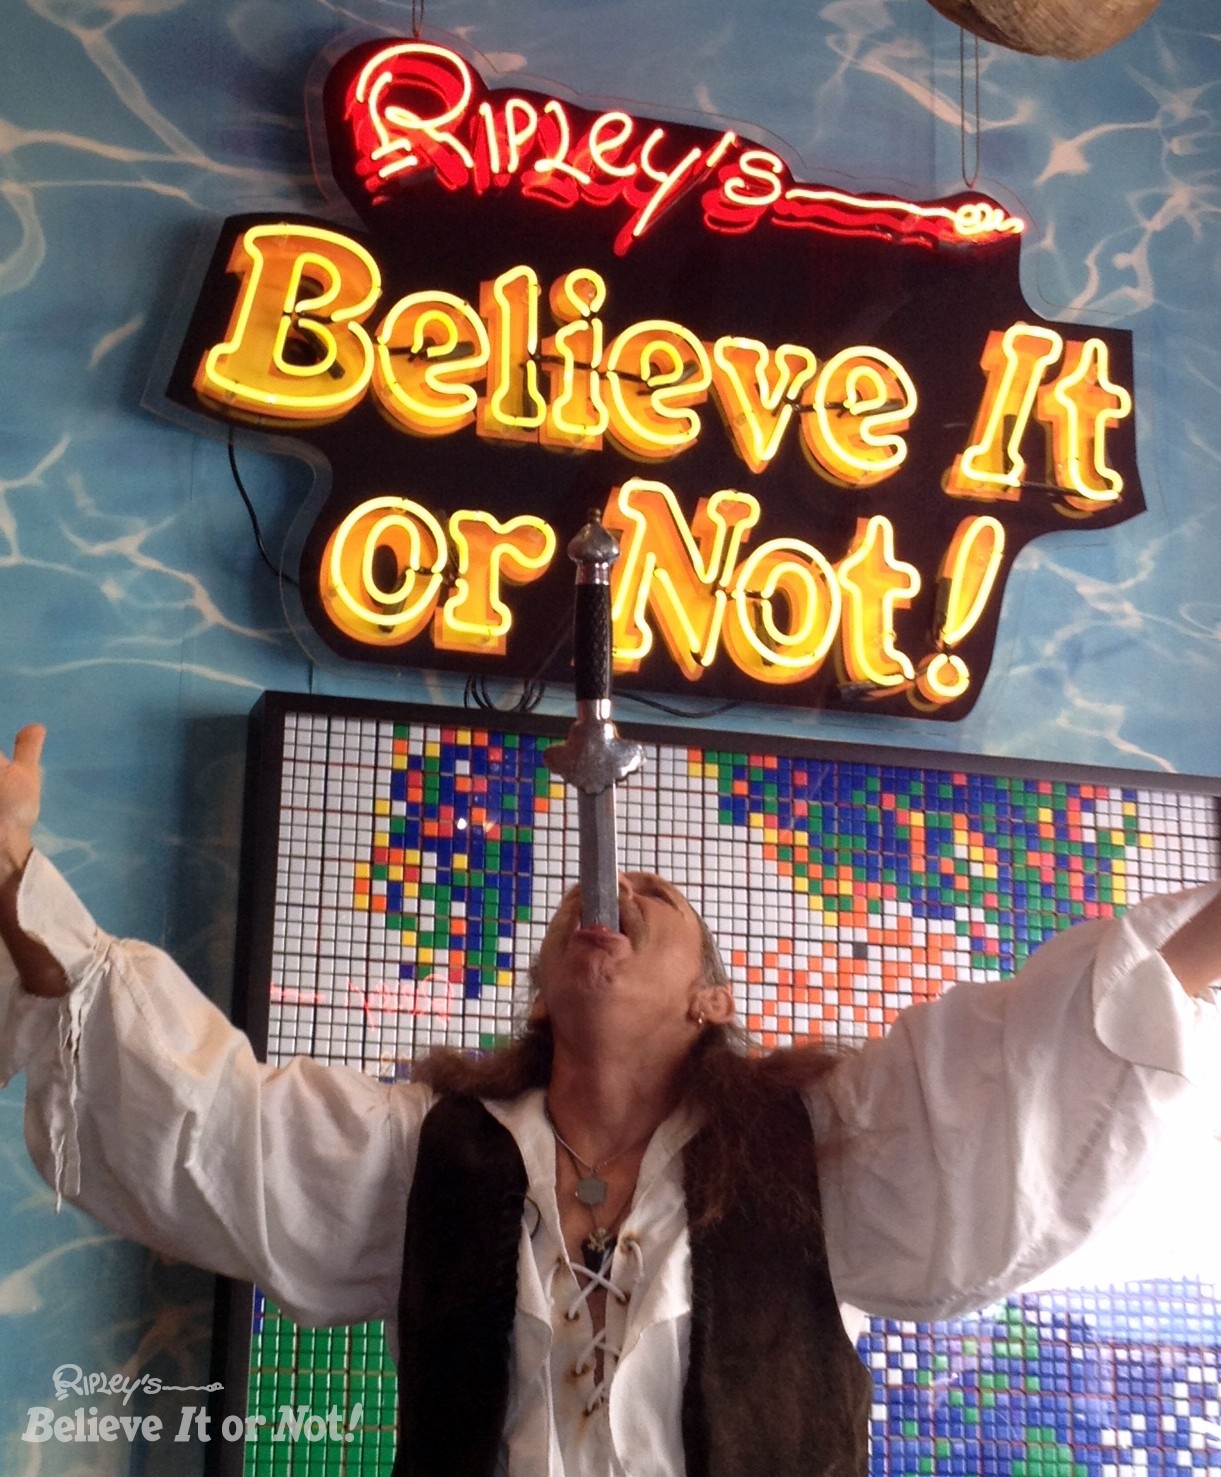 Free Sword Swallowing Demos at Ripley’s Believe It or Not: Feb 28